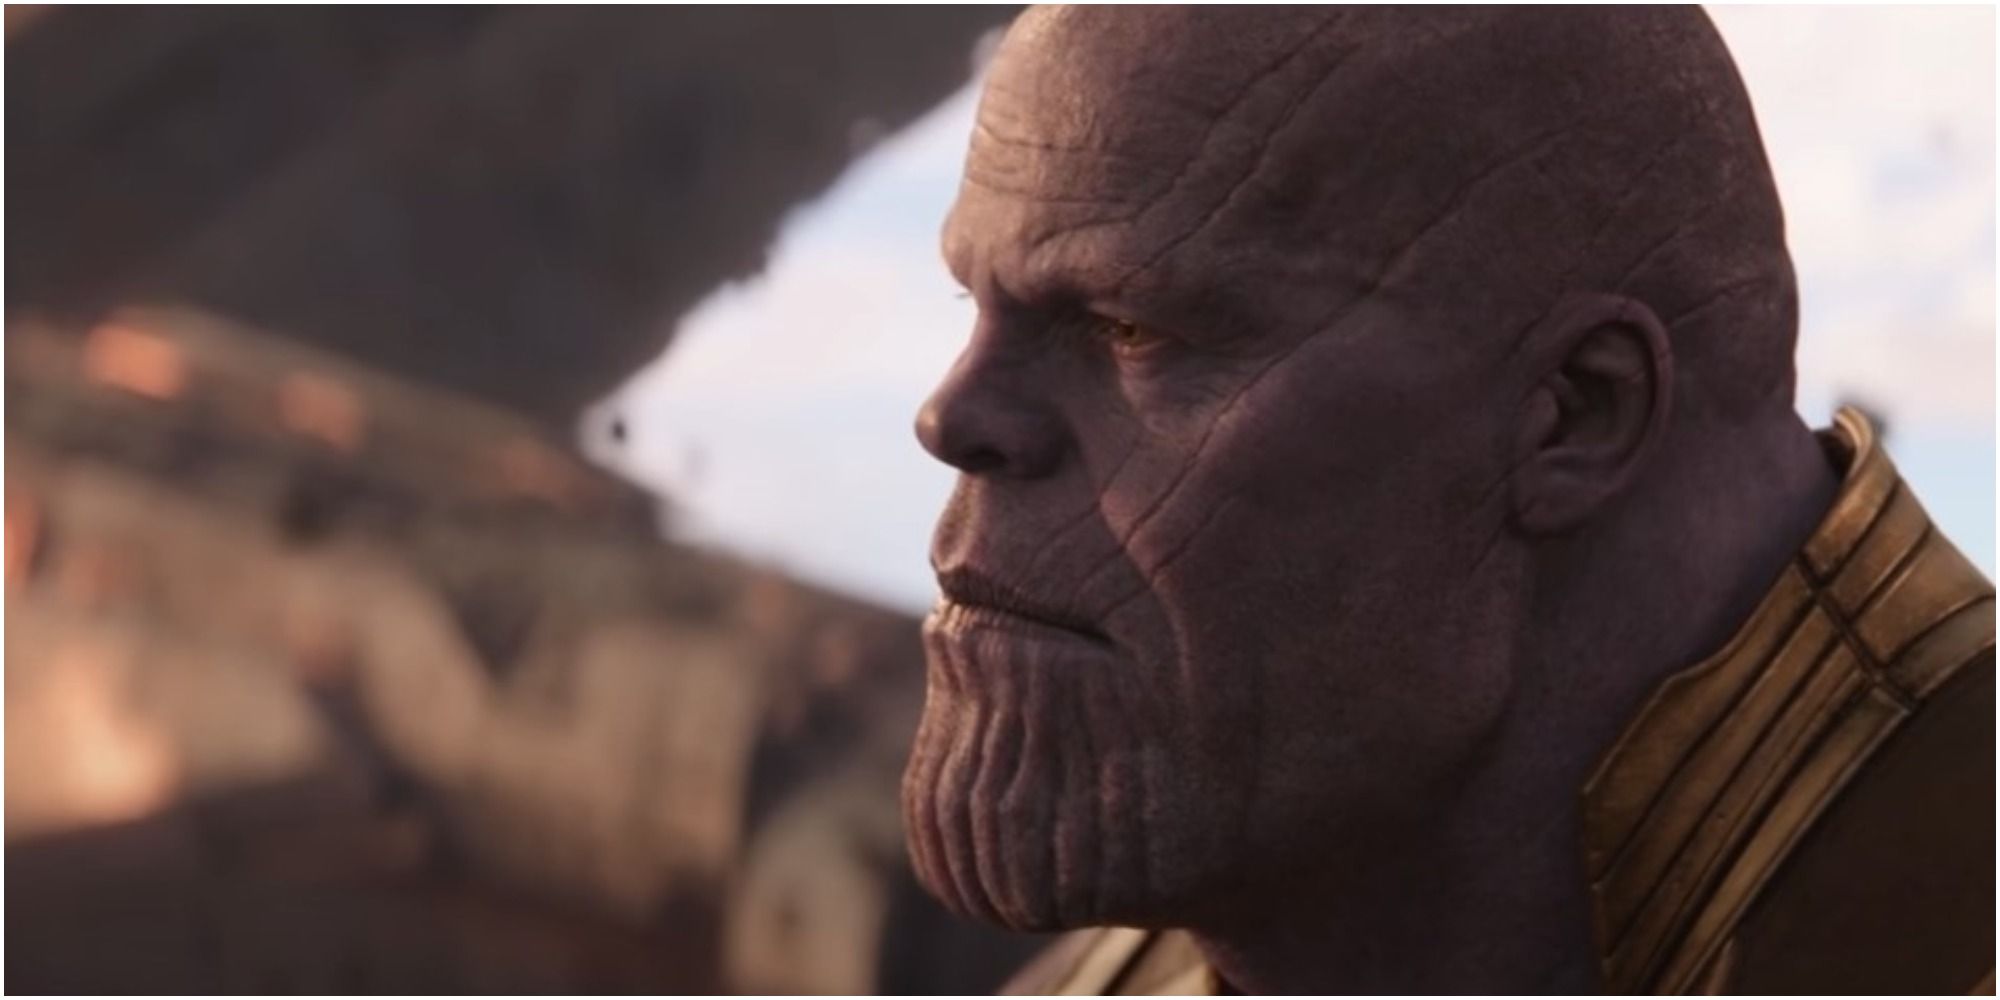 Avengers Infinity War Thanos Contemplating The Choice He Has To Make